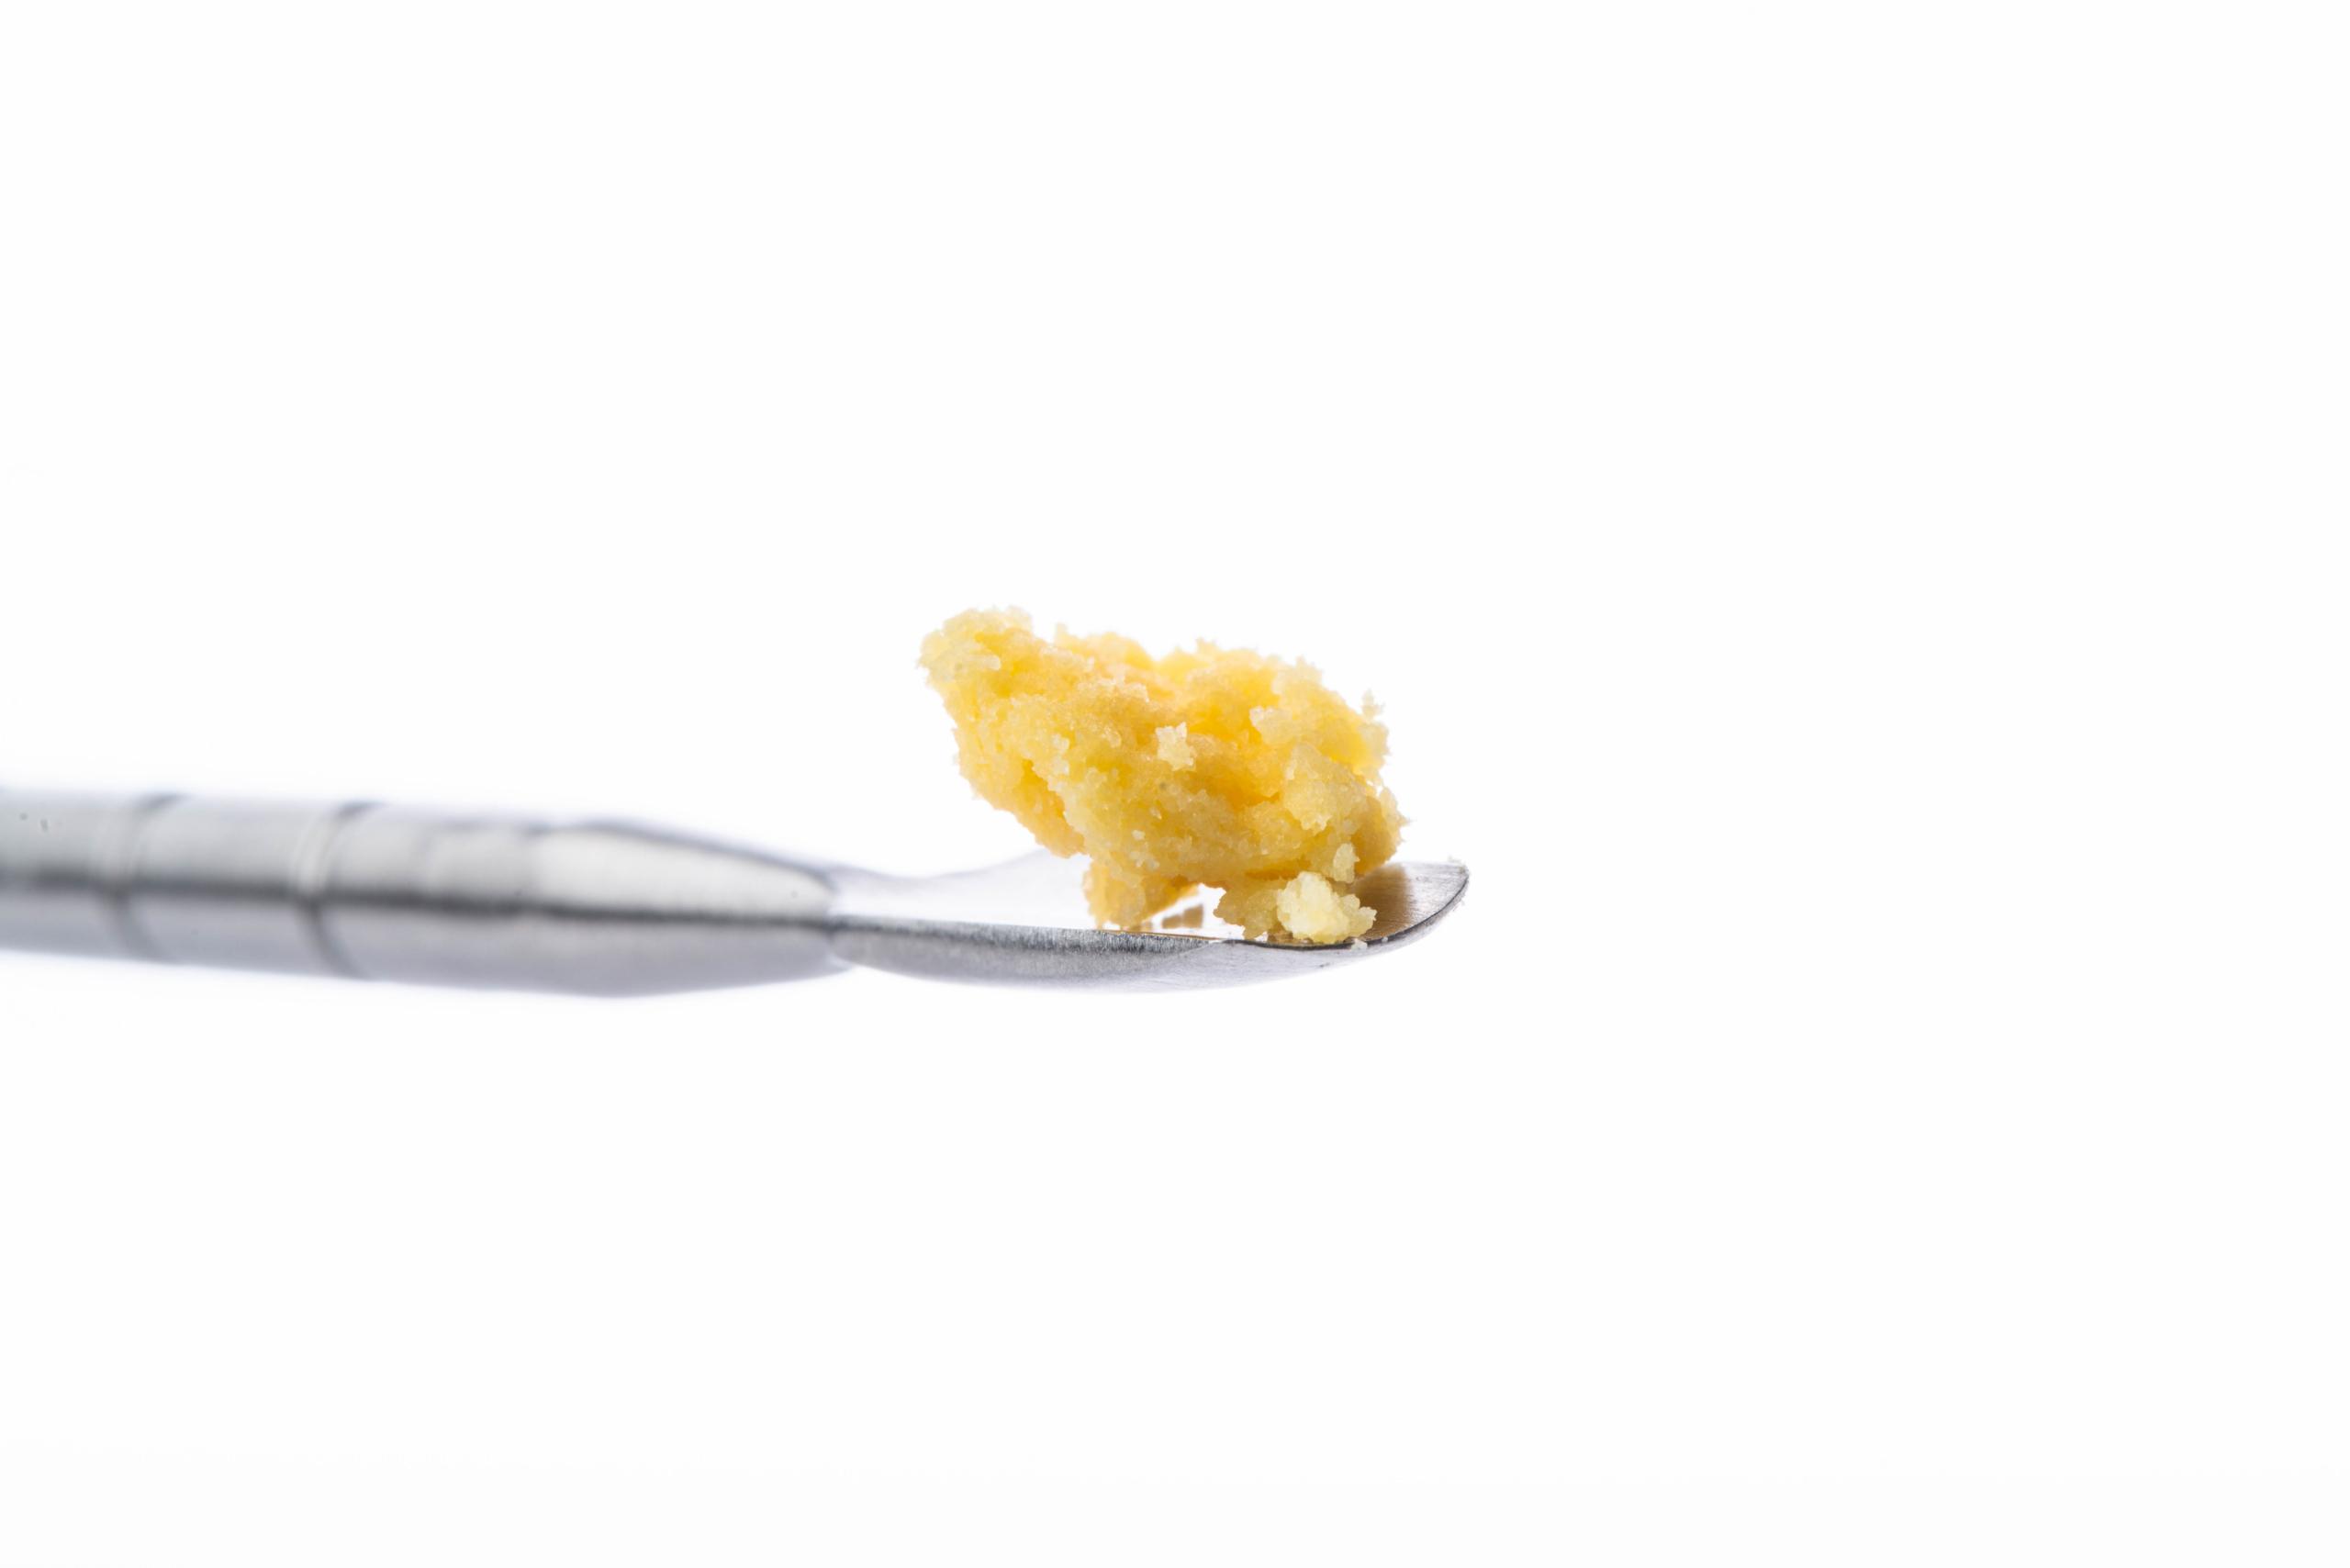 Solvent-free Cannabis Crumble